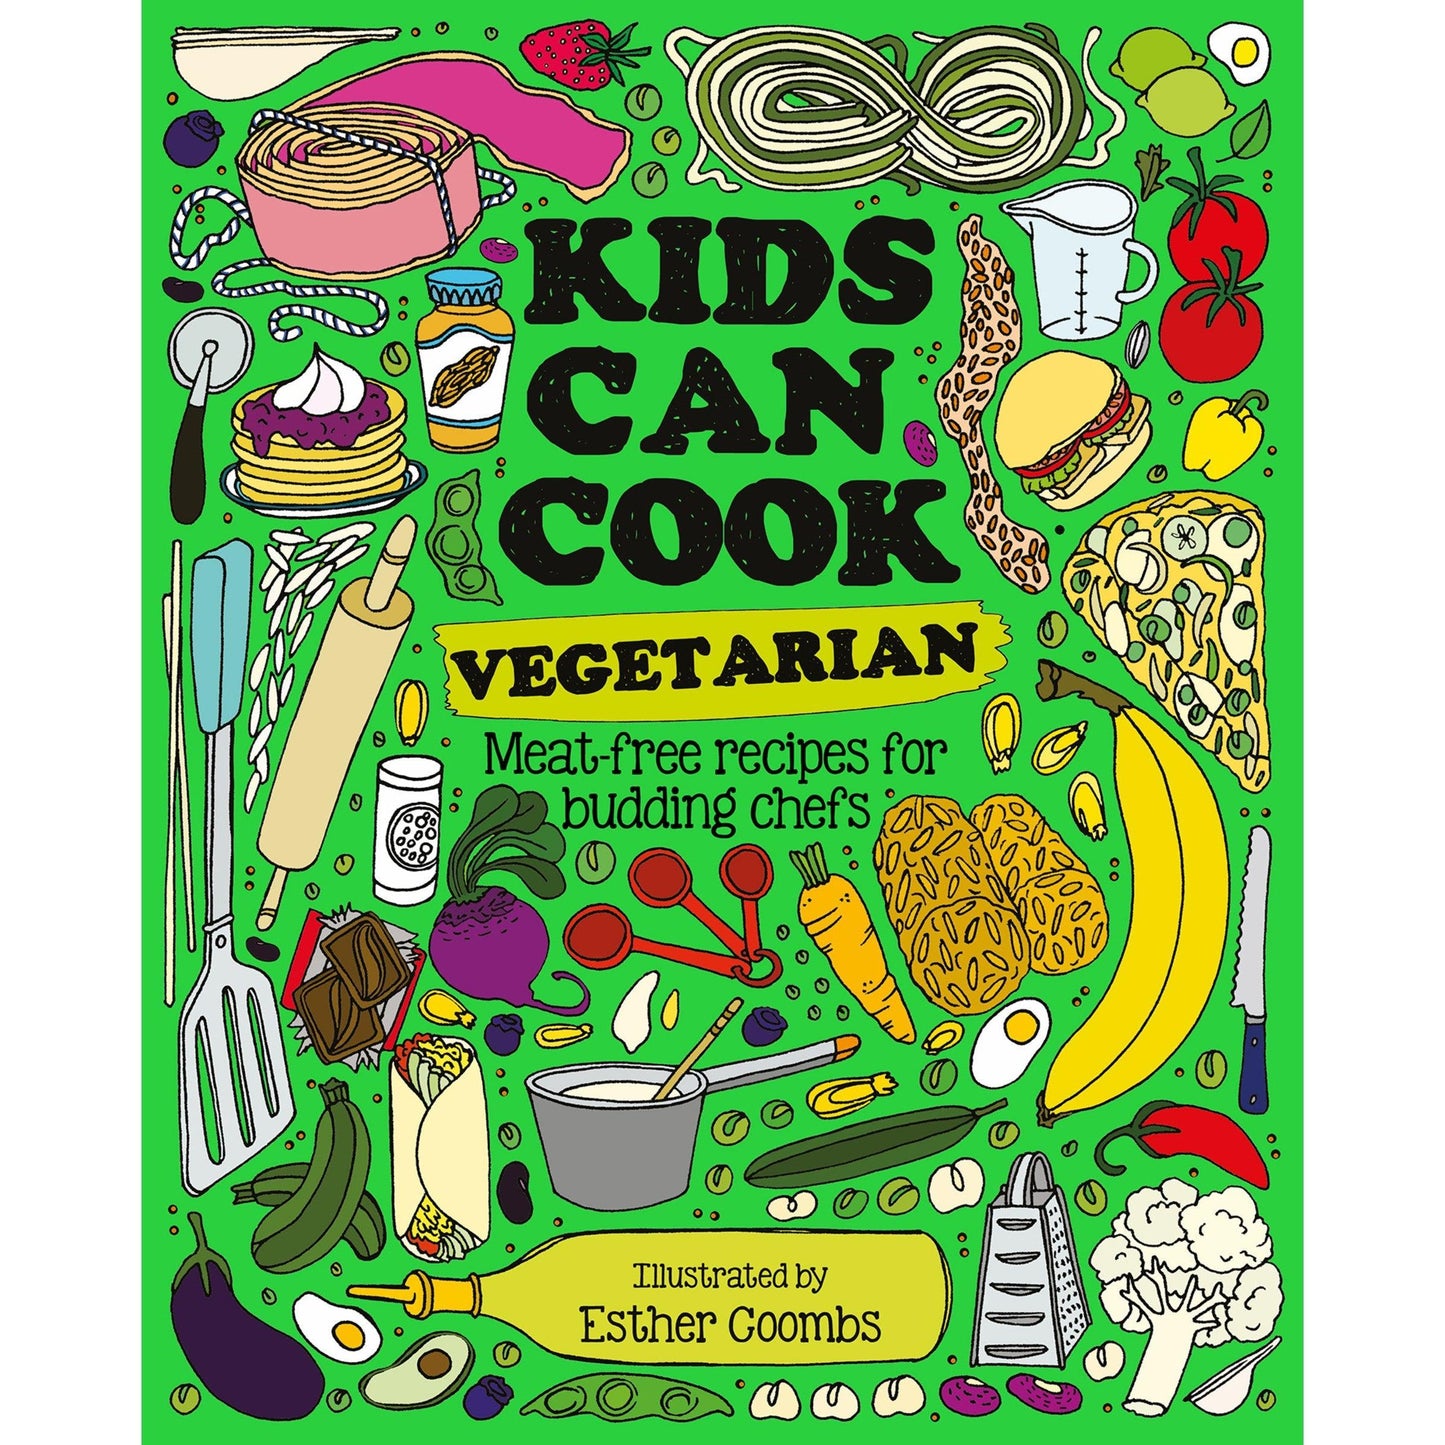 Kids Can Cook Vegetarian Illustrated by Esther Coombs Books Books Various Prettycleanshop